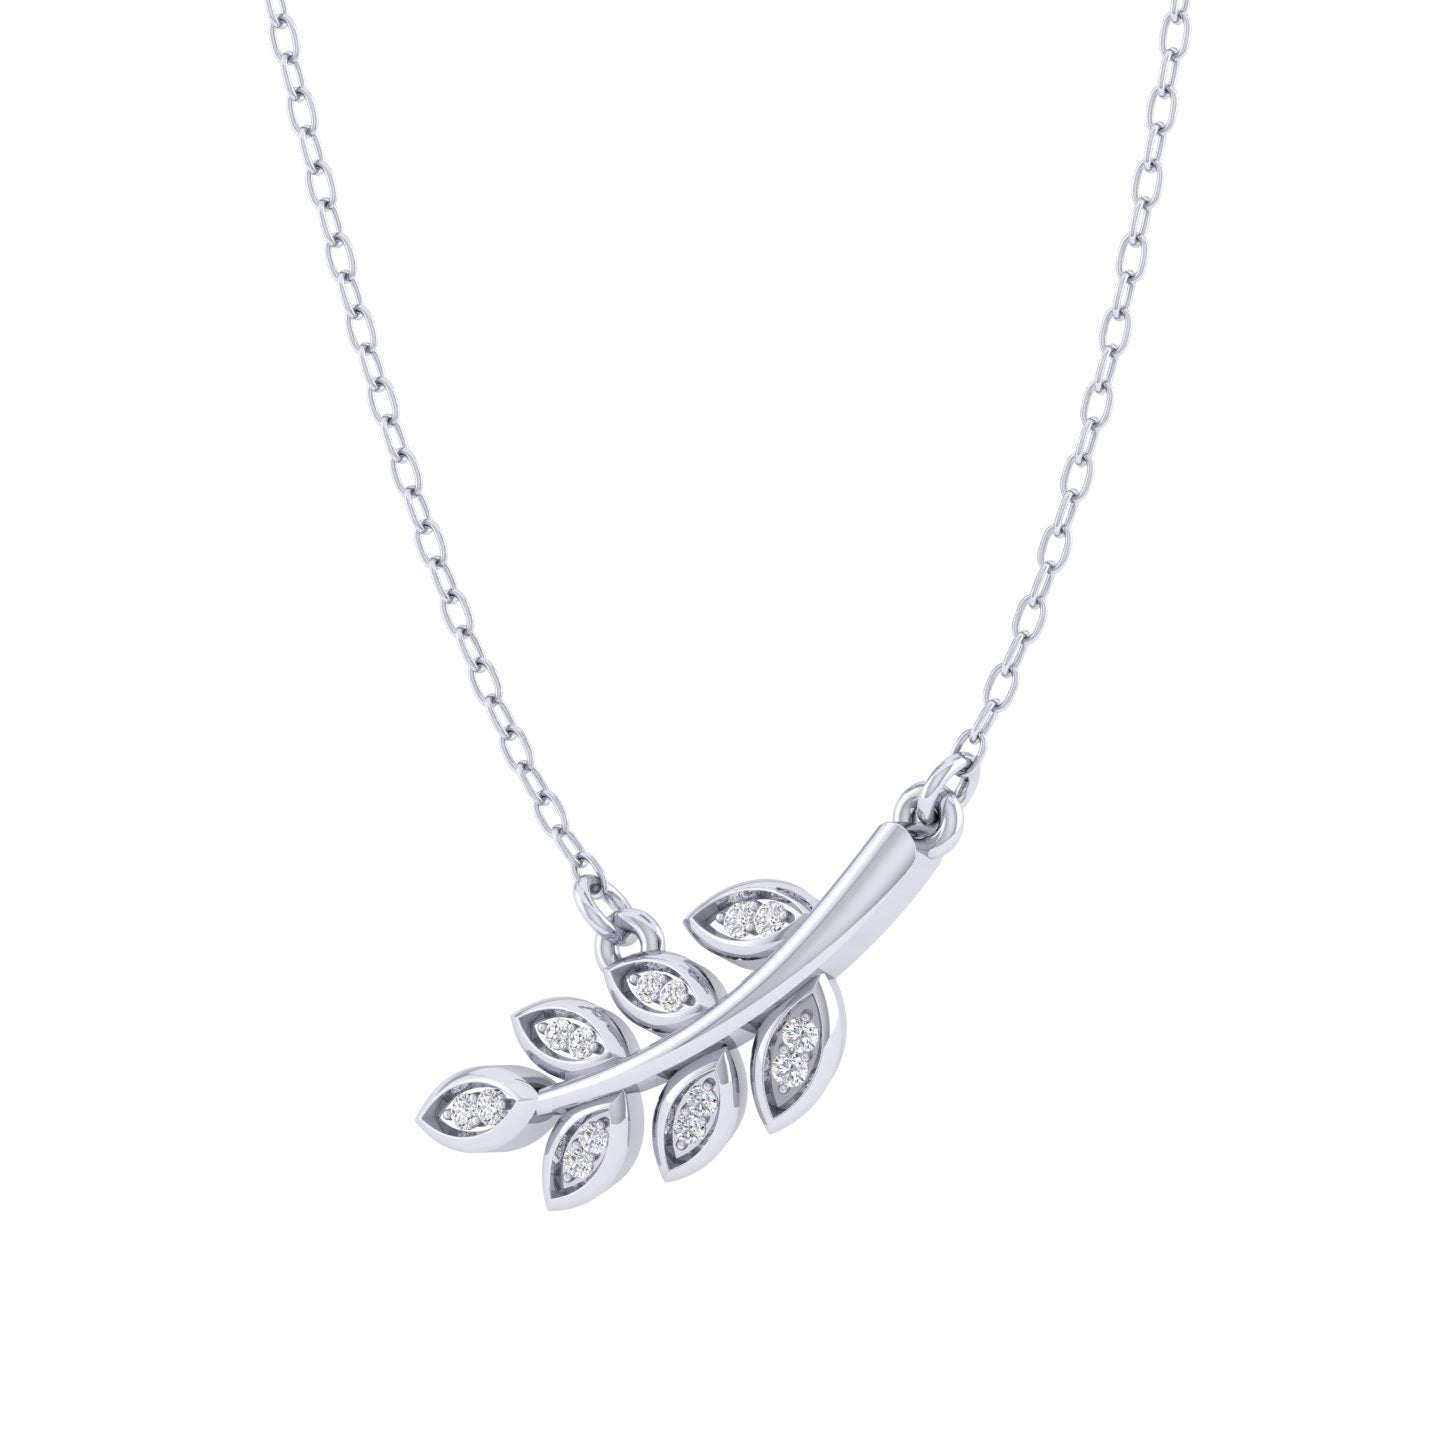 Lucky Leaf 1/20 Cttw Natural Diamond Pendant Necklace set in 925 Sterling Silver